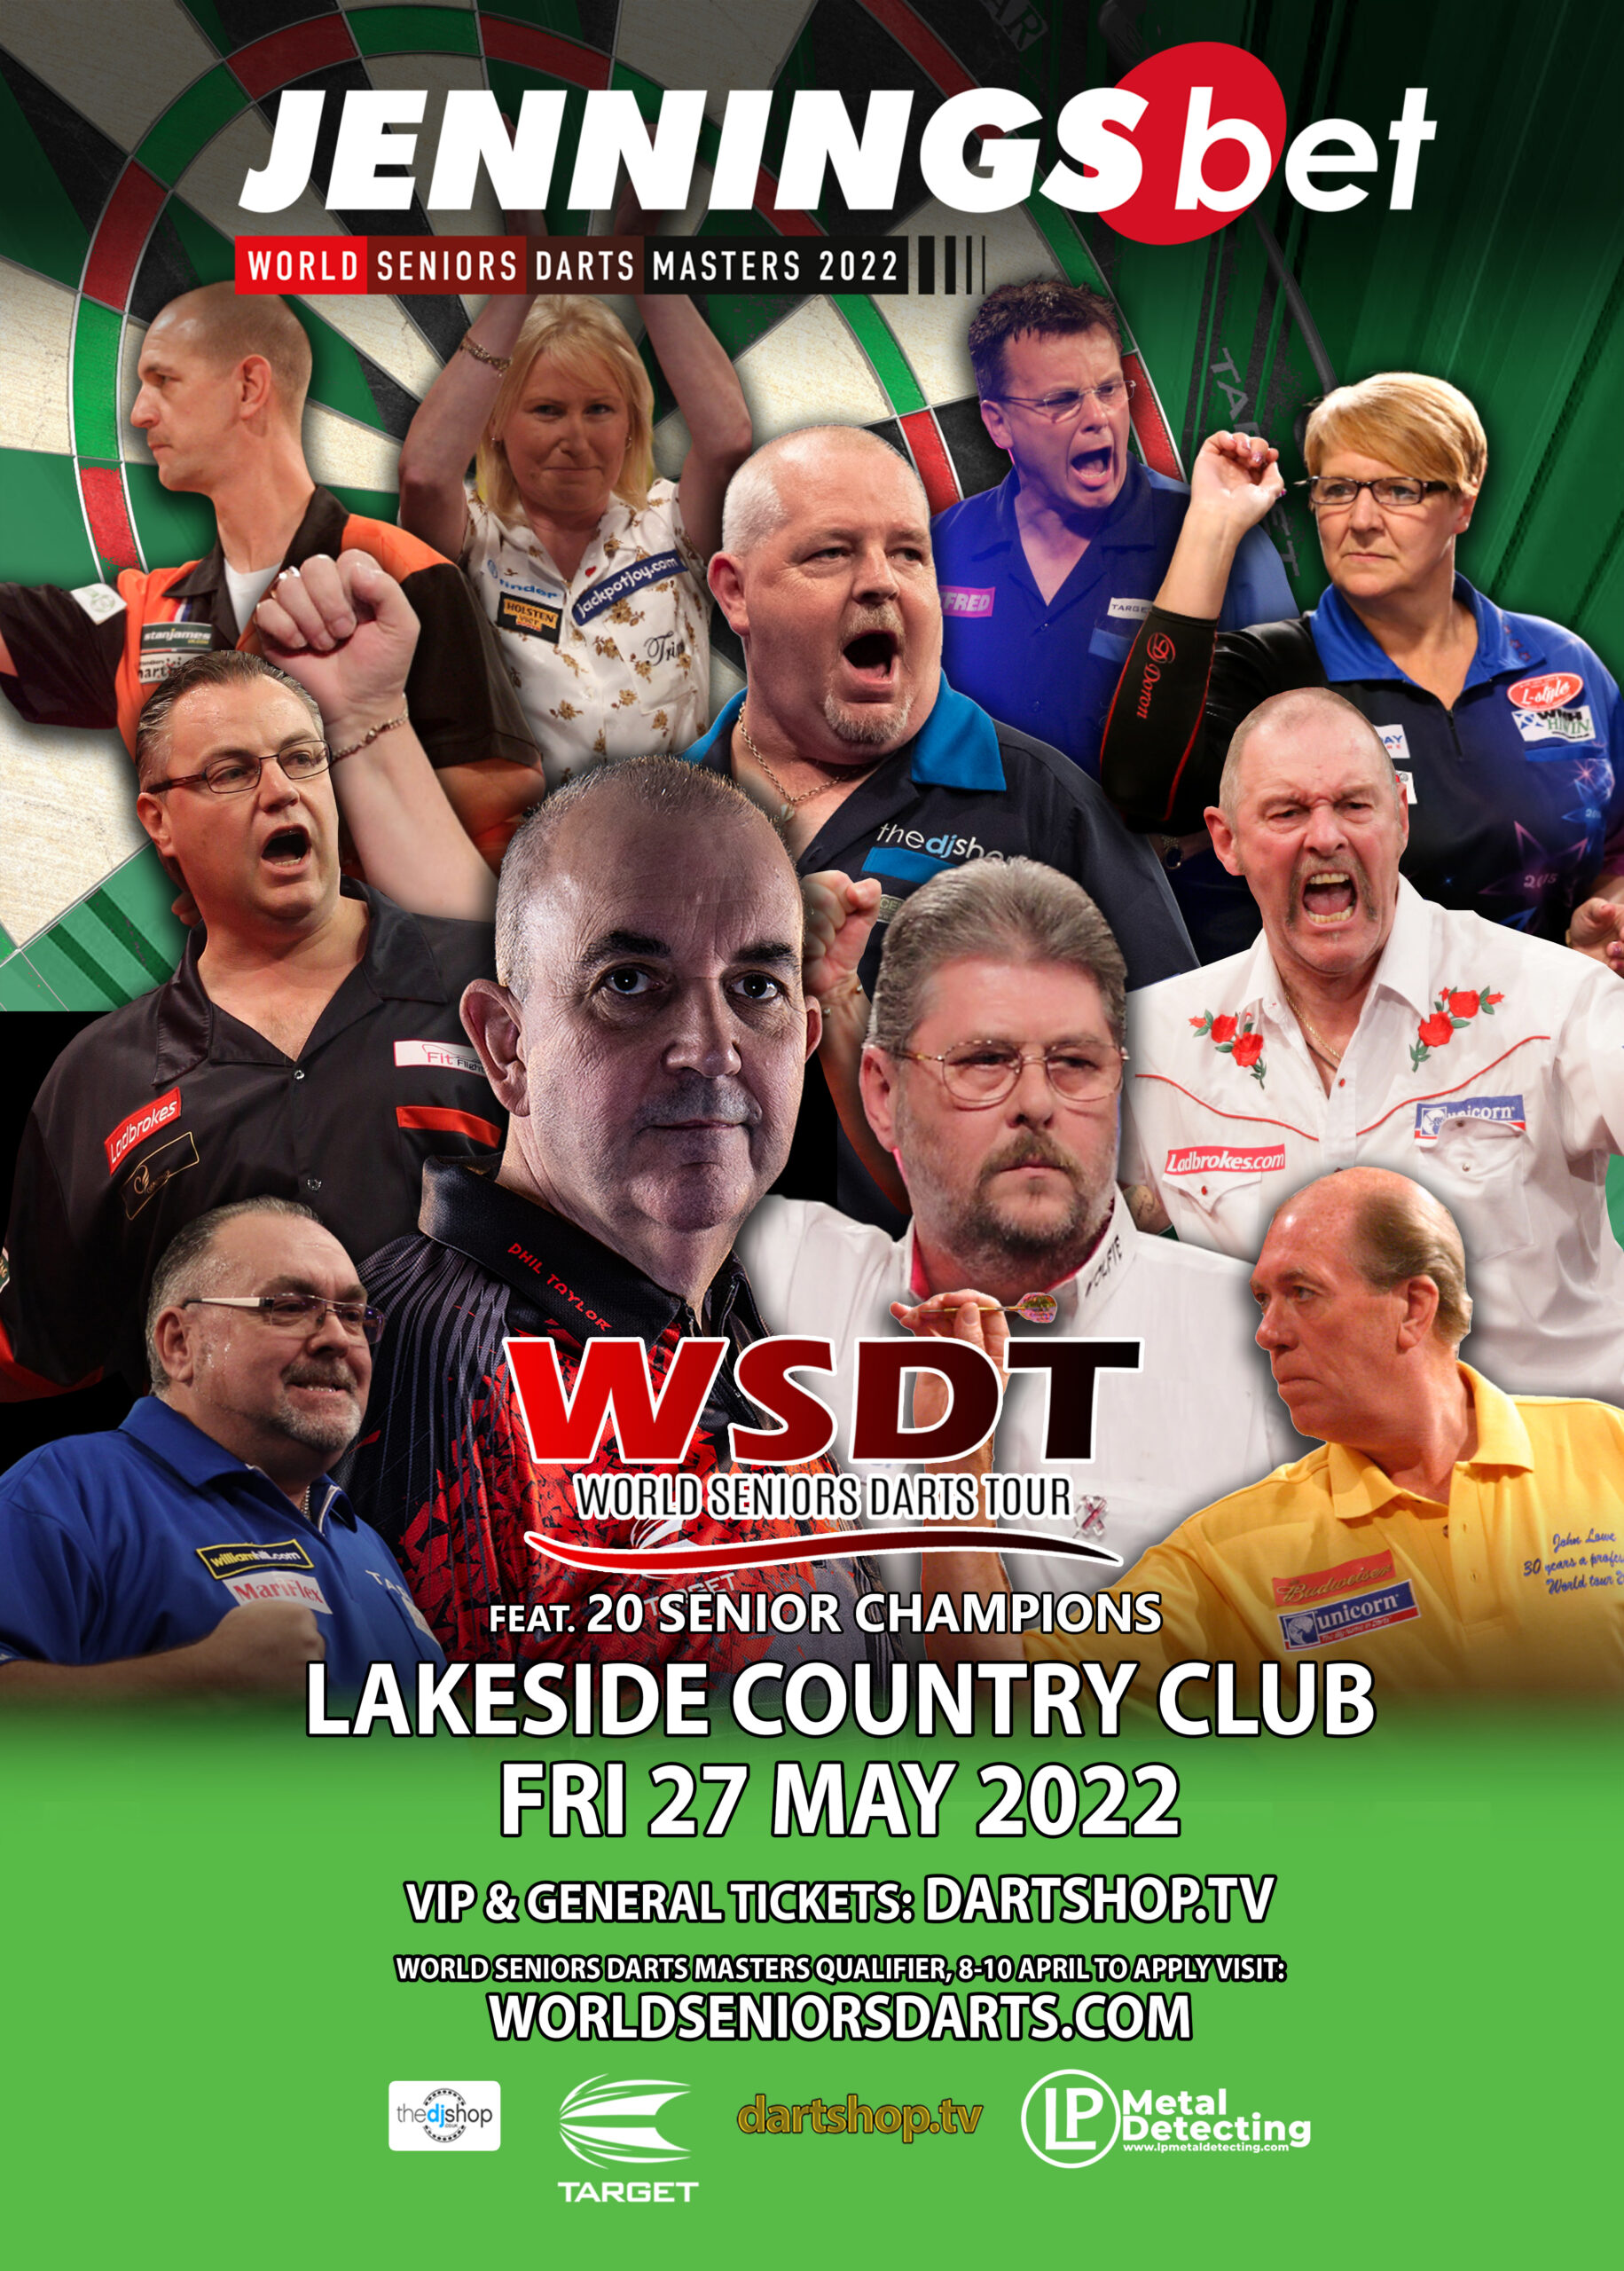 World Seniors Darts Masters 🎯 Darts Preview and ticket info